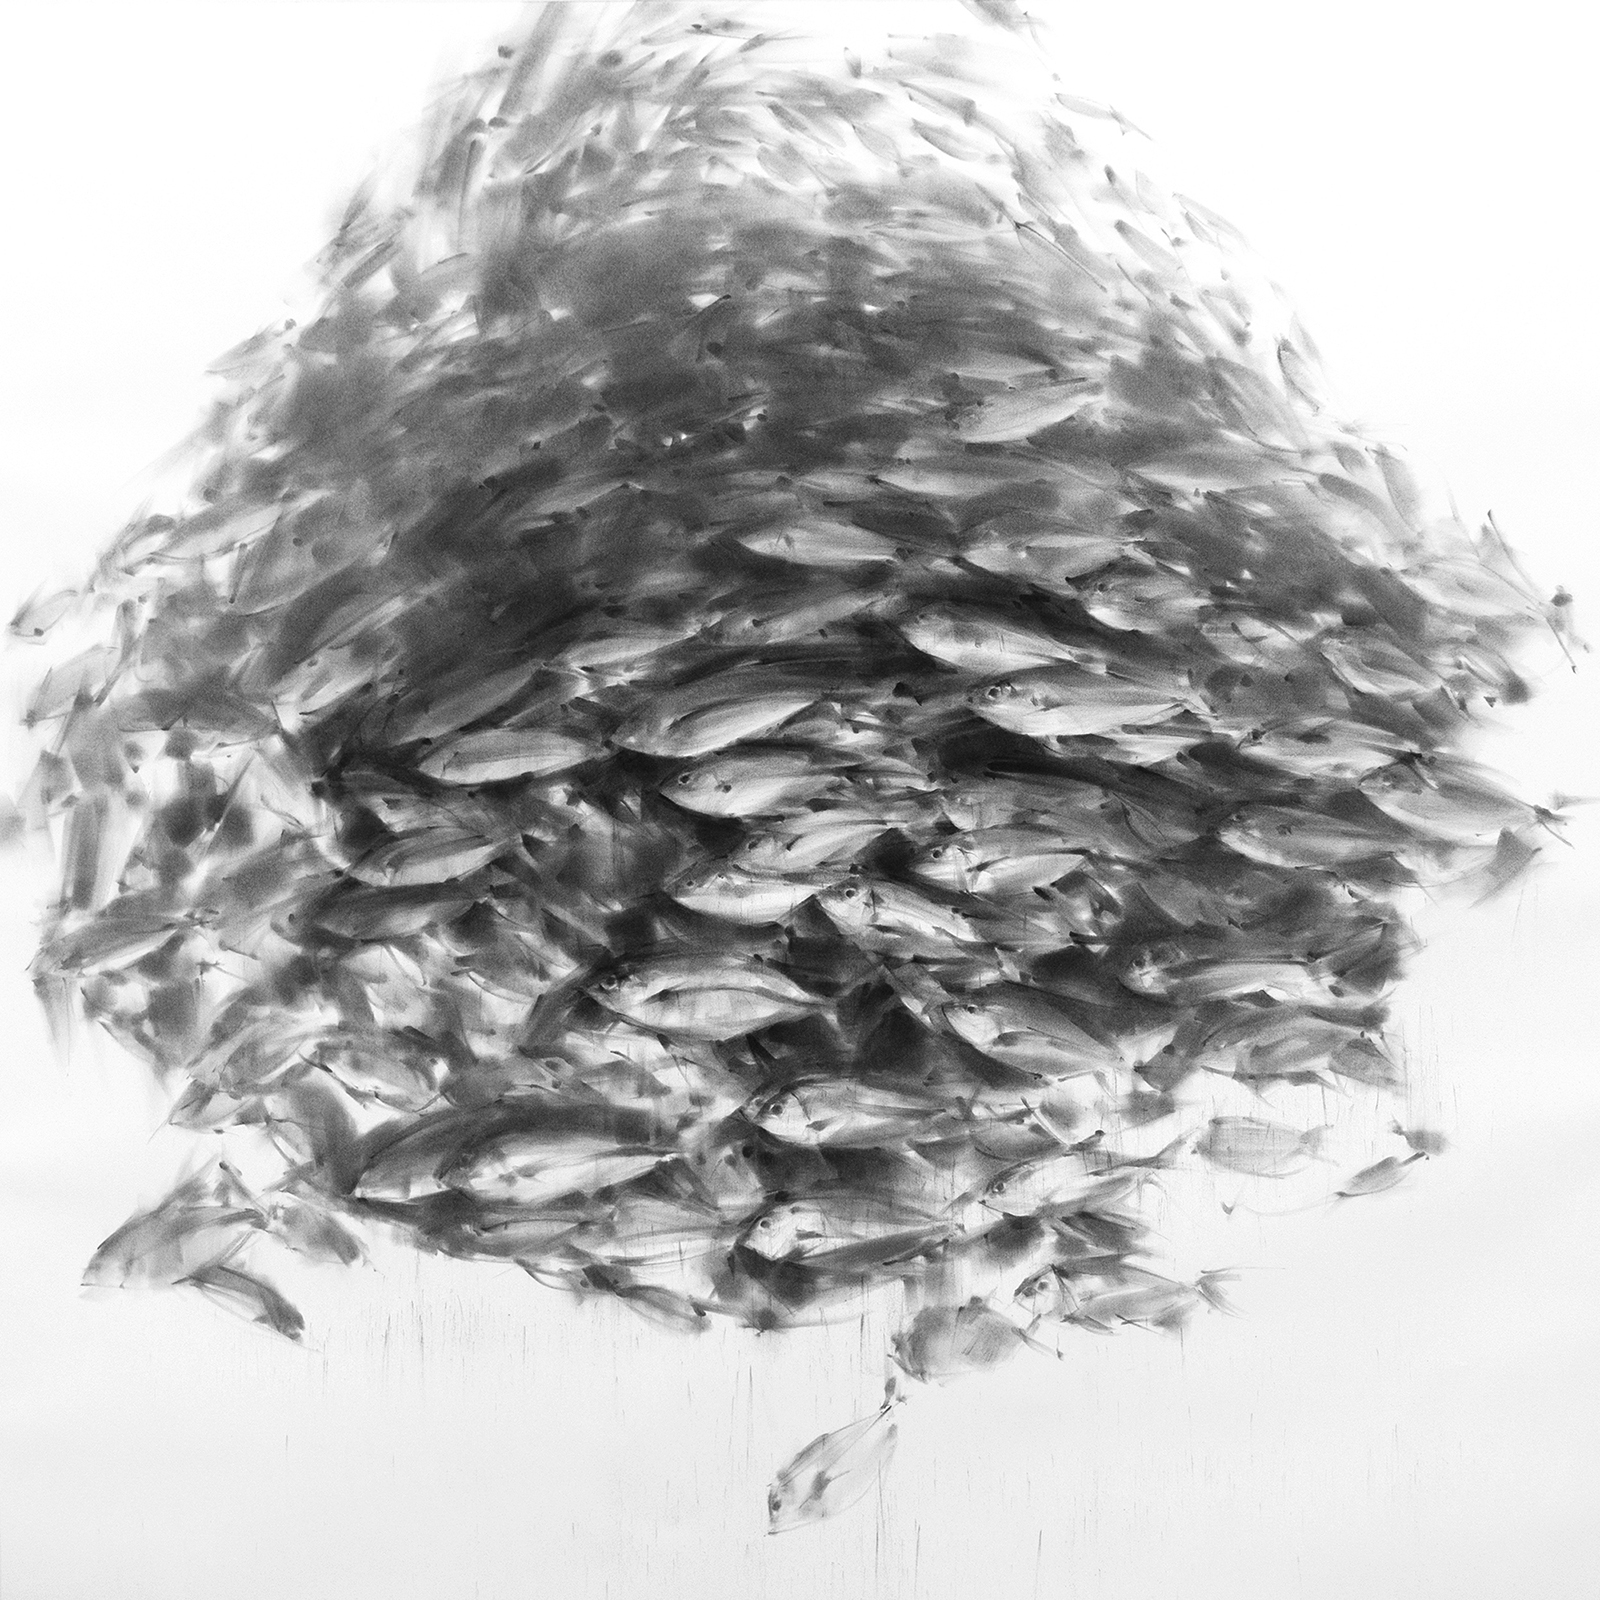   More from Tianyin's series of Schooling Fish